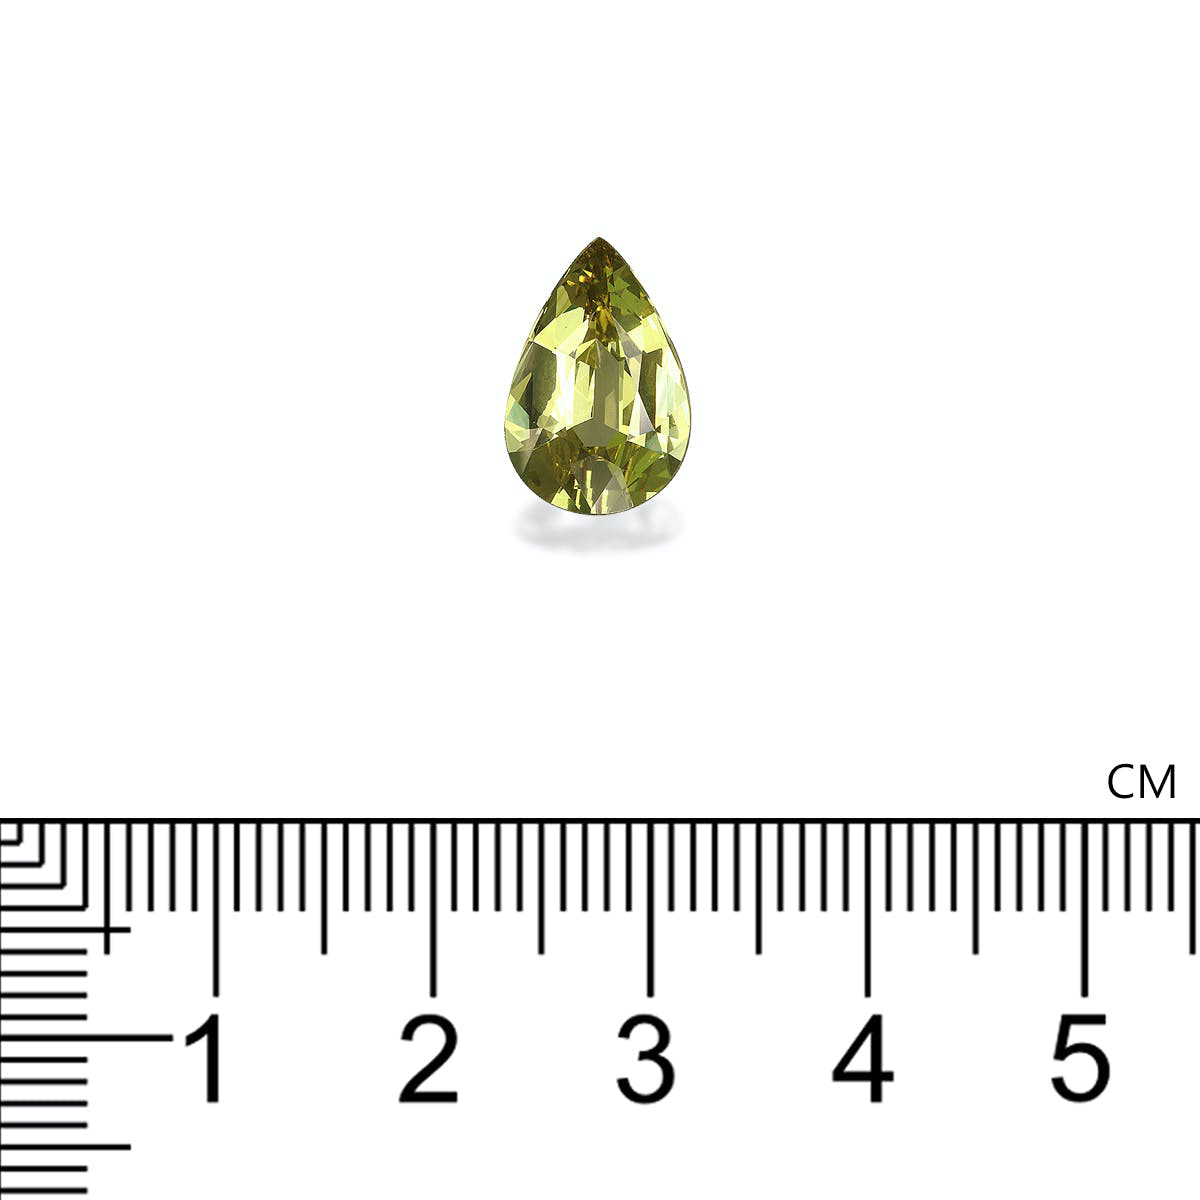 Picture of Lime Green Grossular Garnet 3.75ct (GG0051)